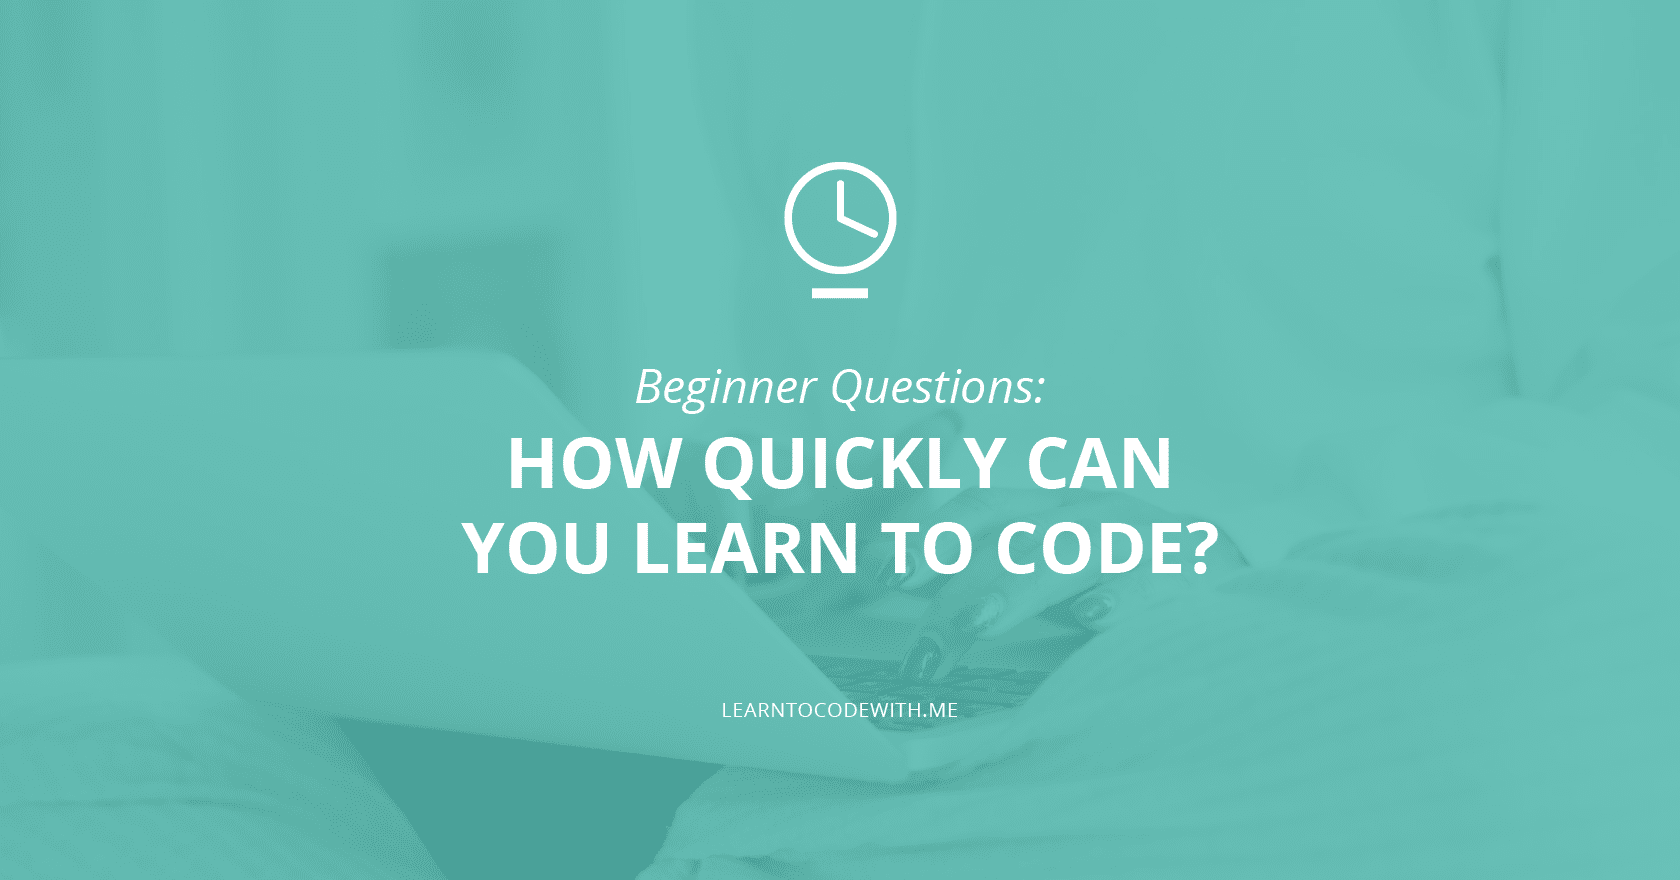 How quickly can you learn to code?